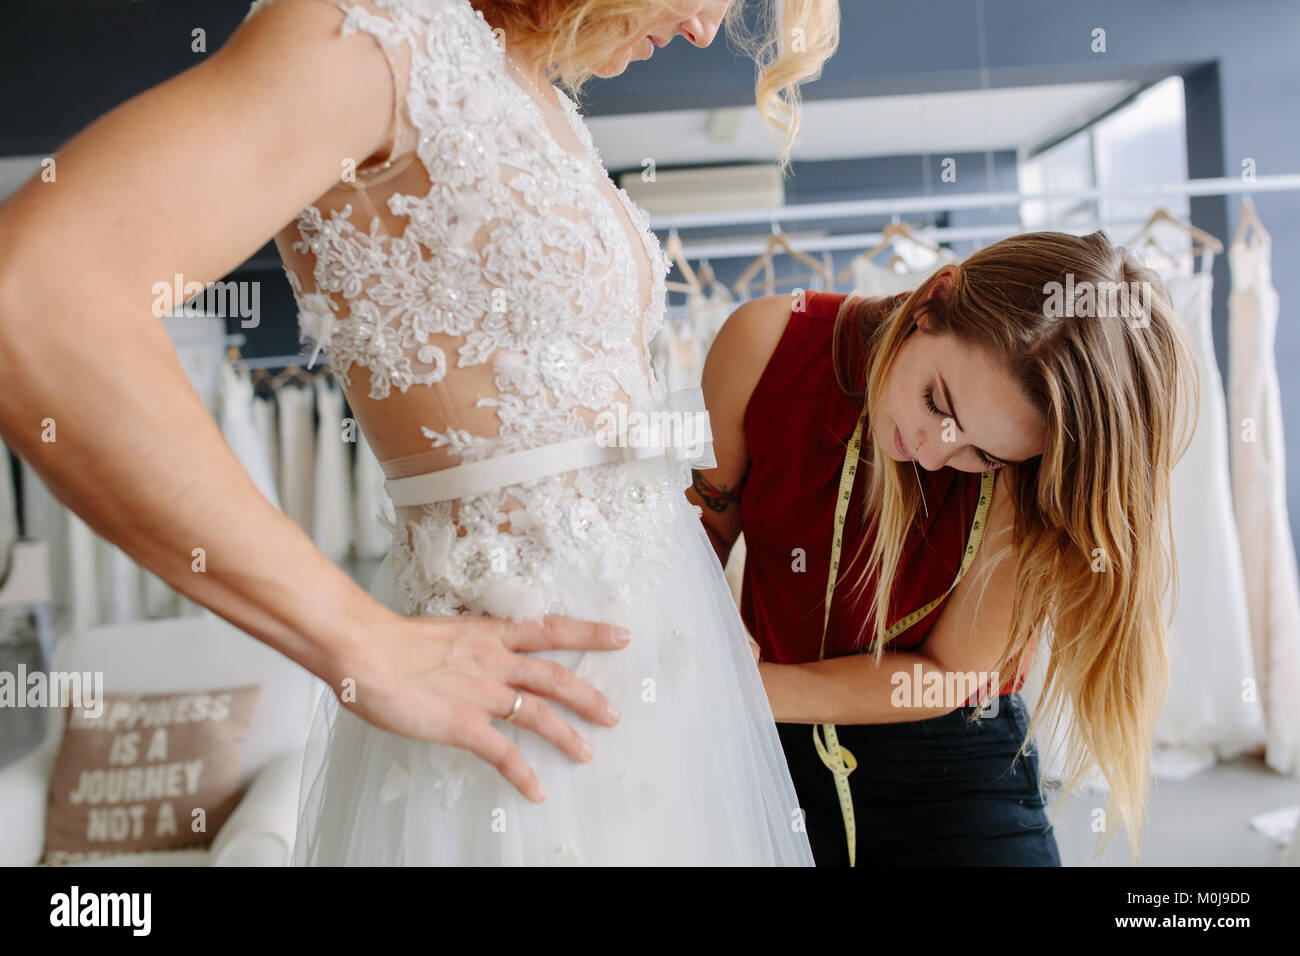 Skillful dress designer fitting wedding gown to woman in her boutique. Woman making adjustments to bridal gown in fashion designer studio. Stock Photo